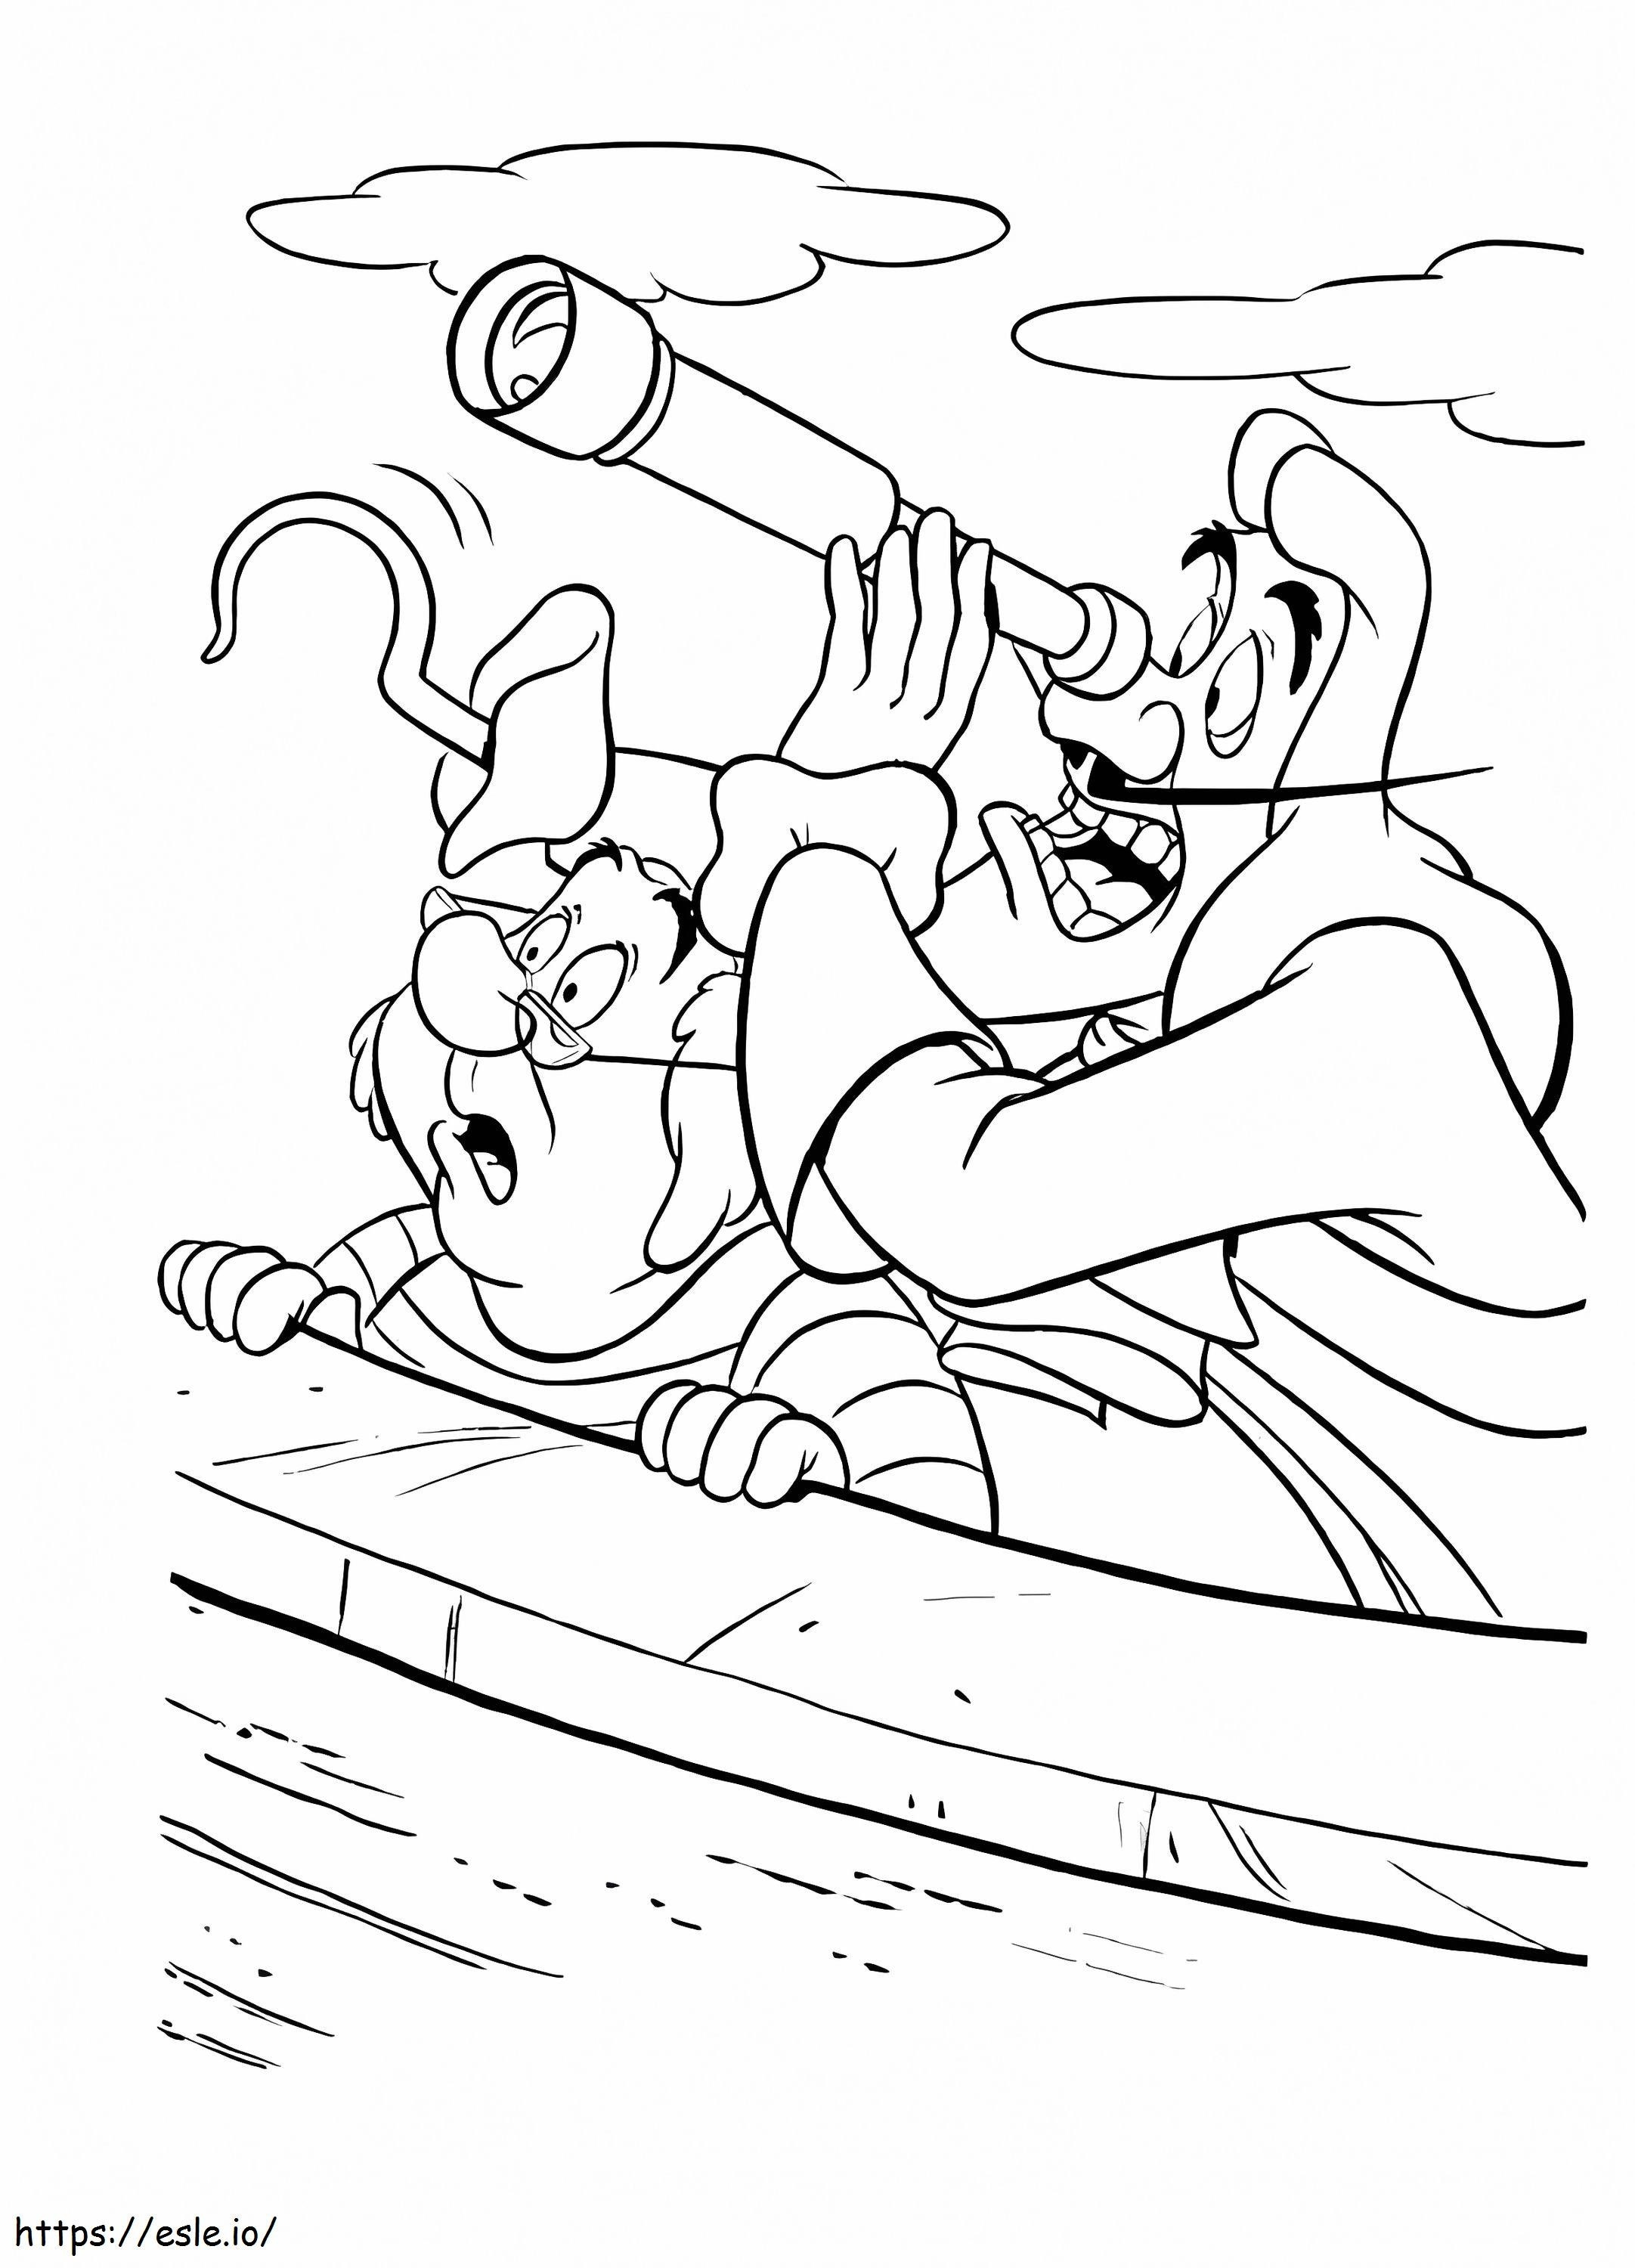 Captain Hook And Mr Smee Spying On Peter Pan coloring page